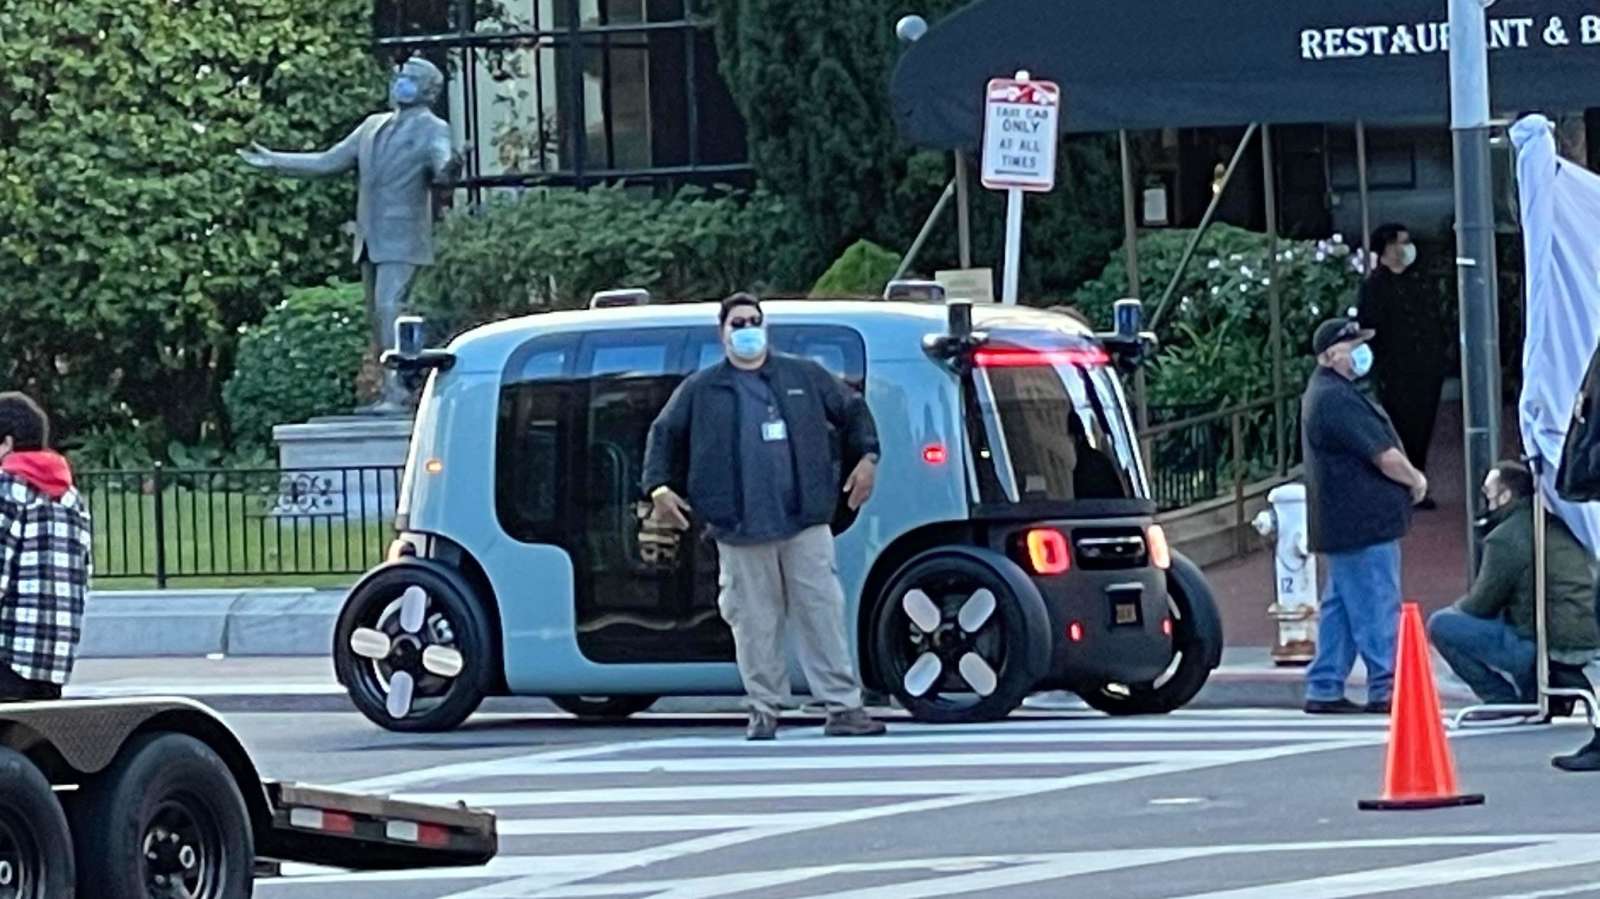 Amazon’s Zoox driverless taxi spotted in San Francisco